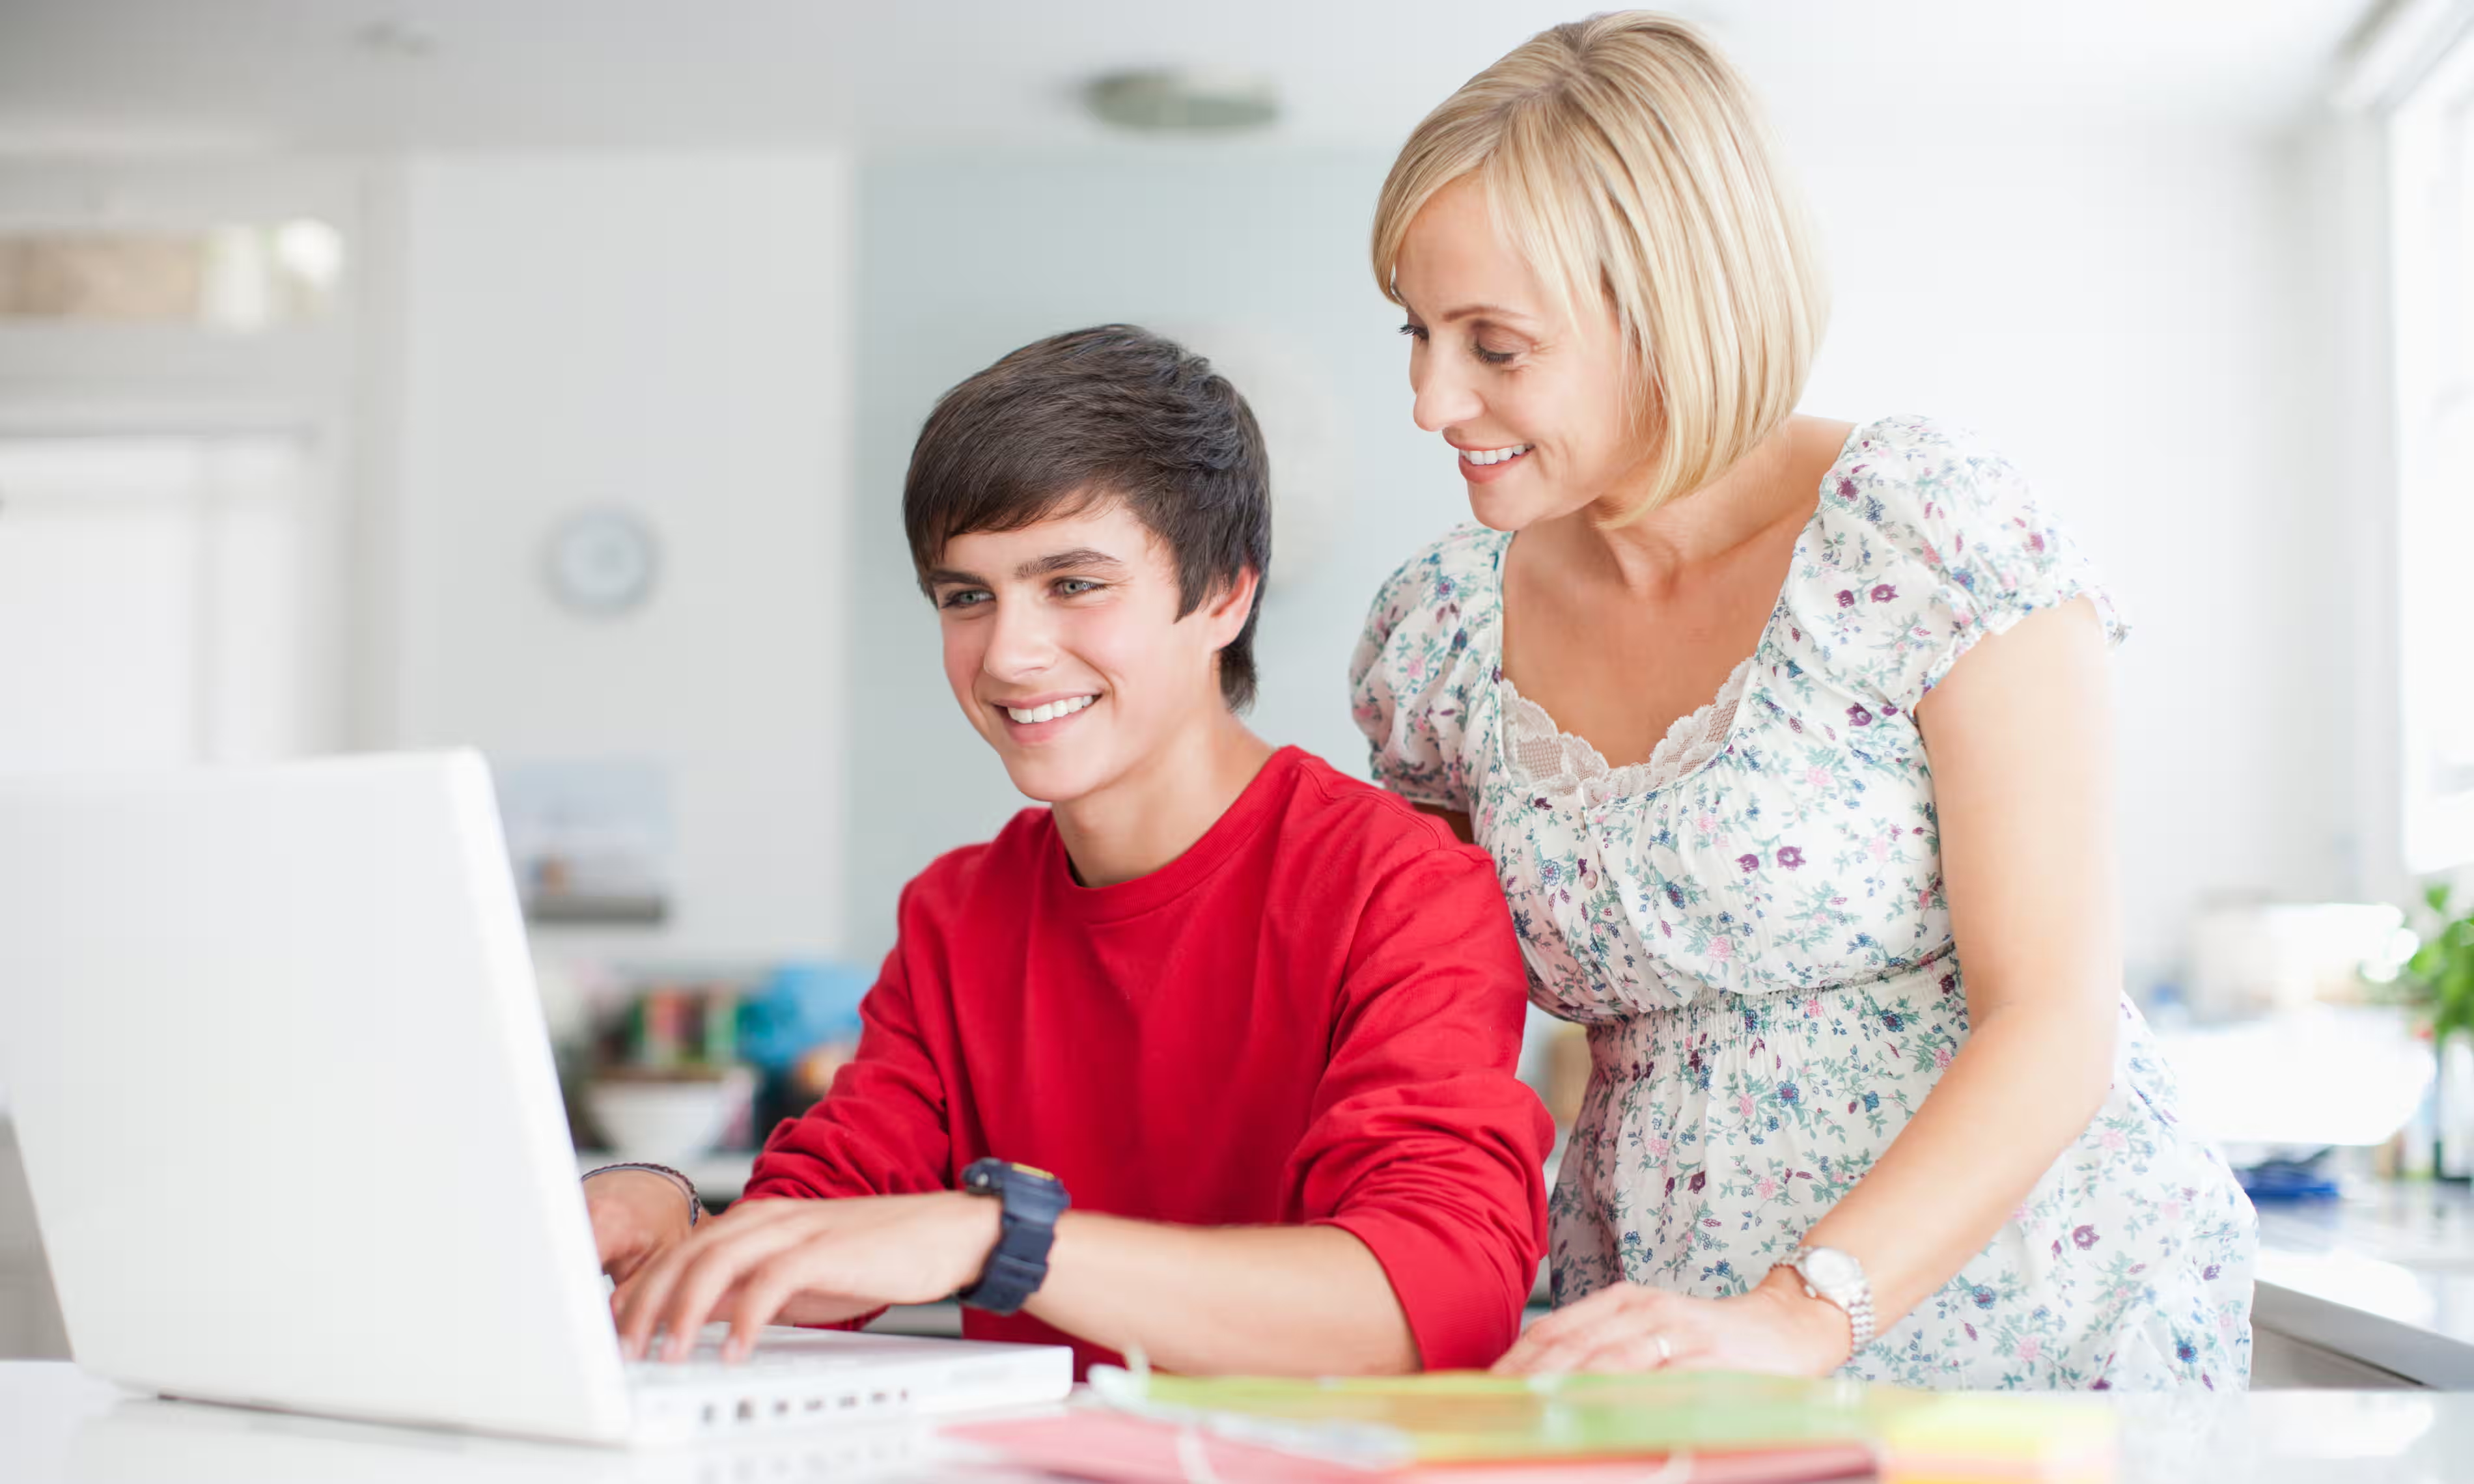 Parents Overestimate Sons’ Math Skills More Than Daughters